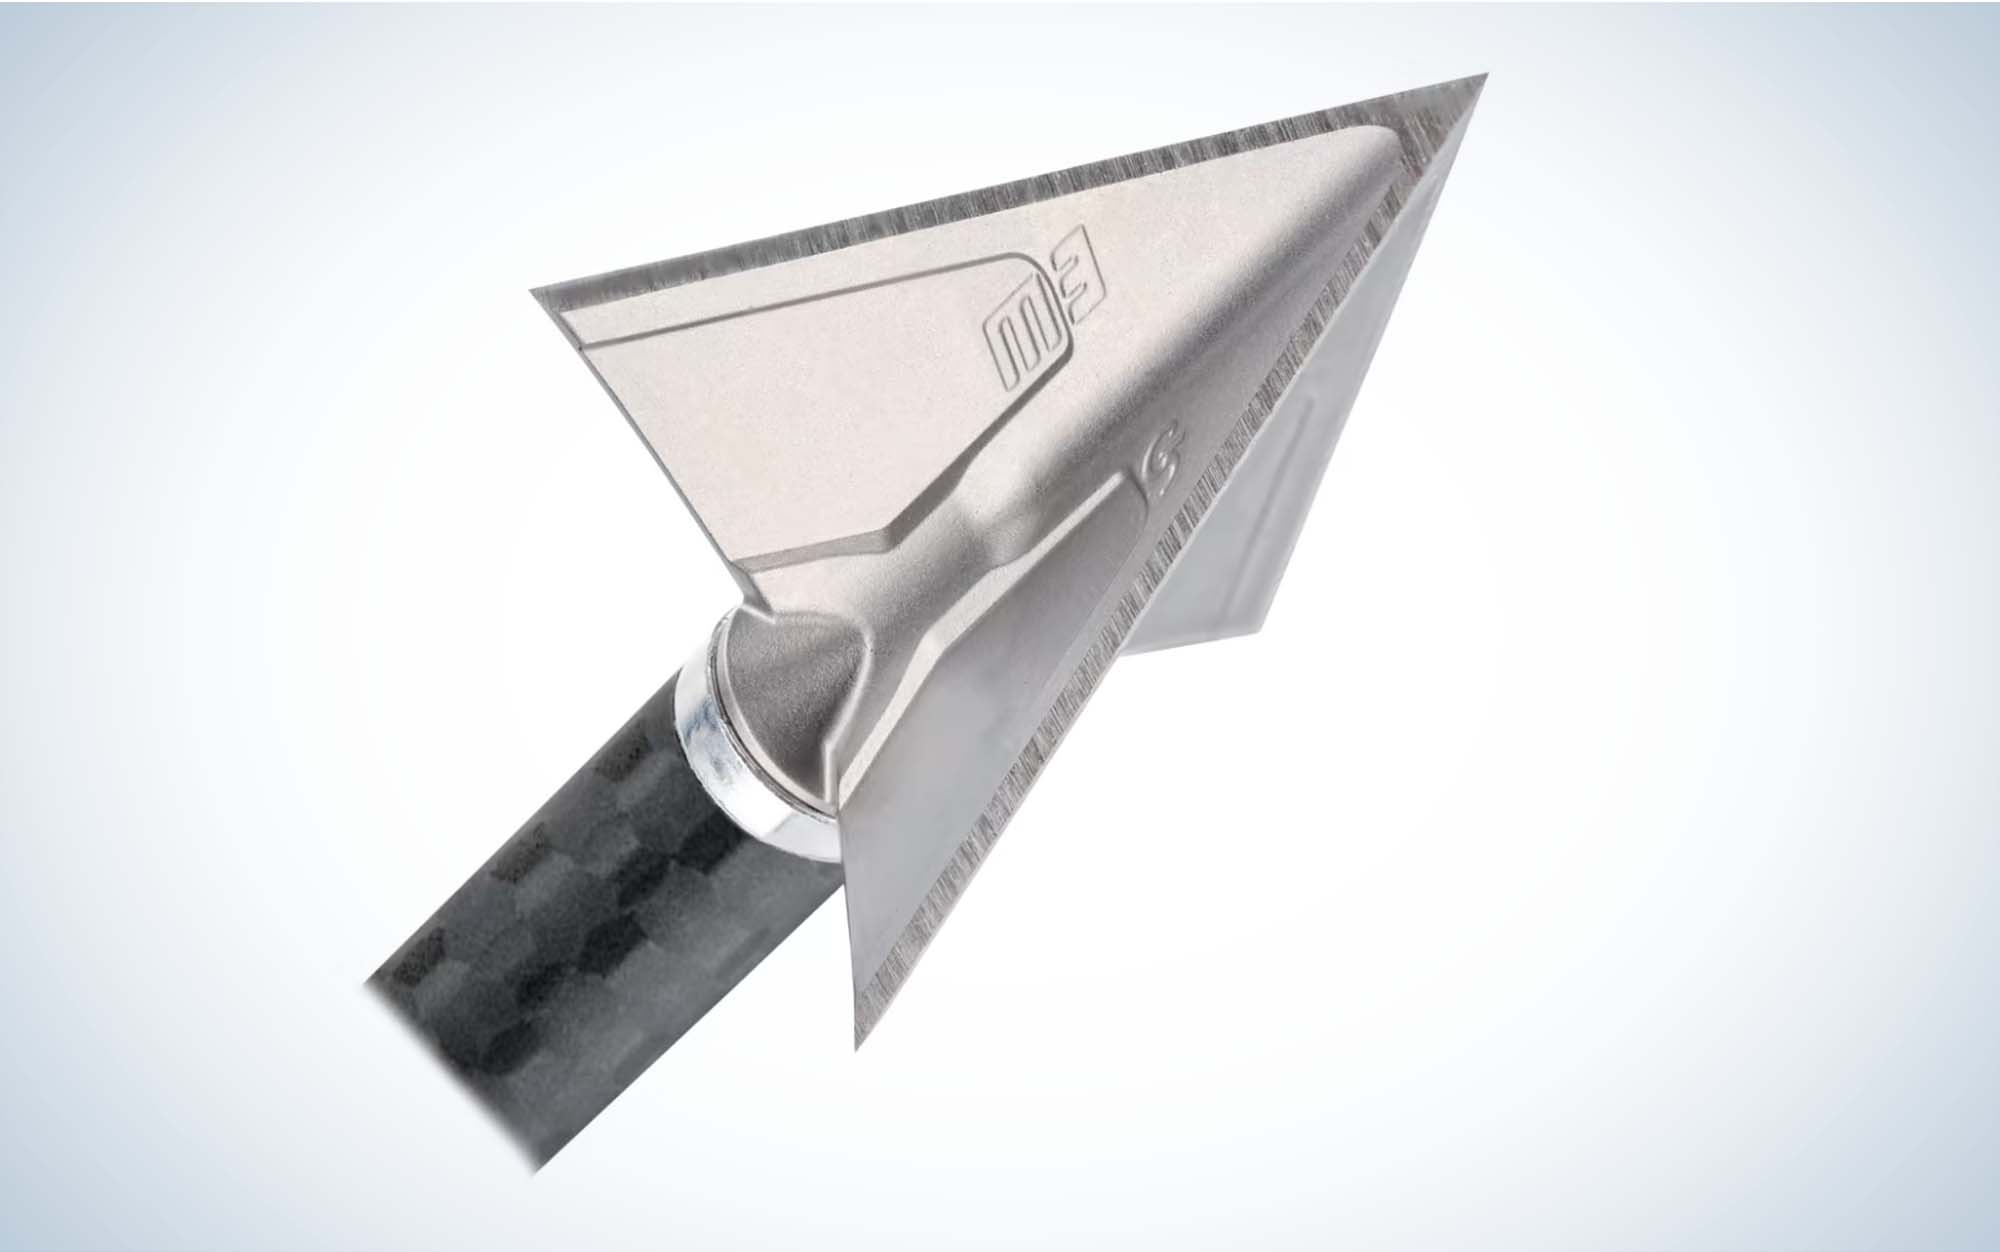 The G5 Montec M3 is one of the best broadheads for elk.